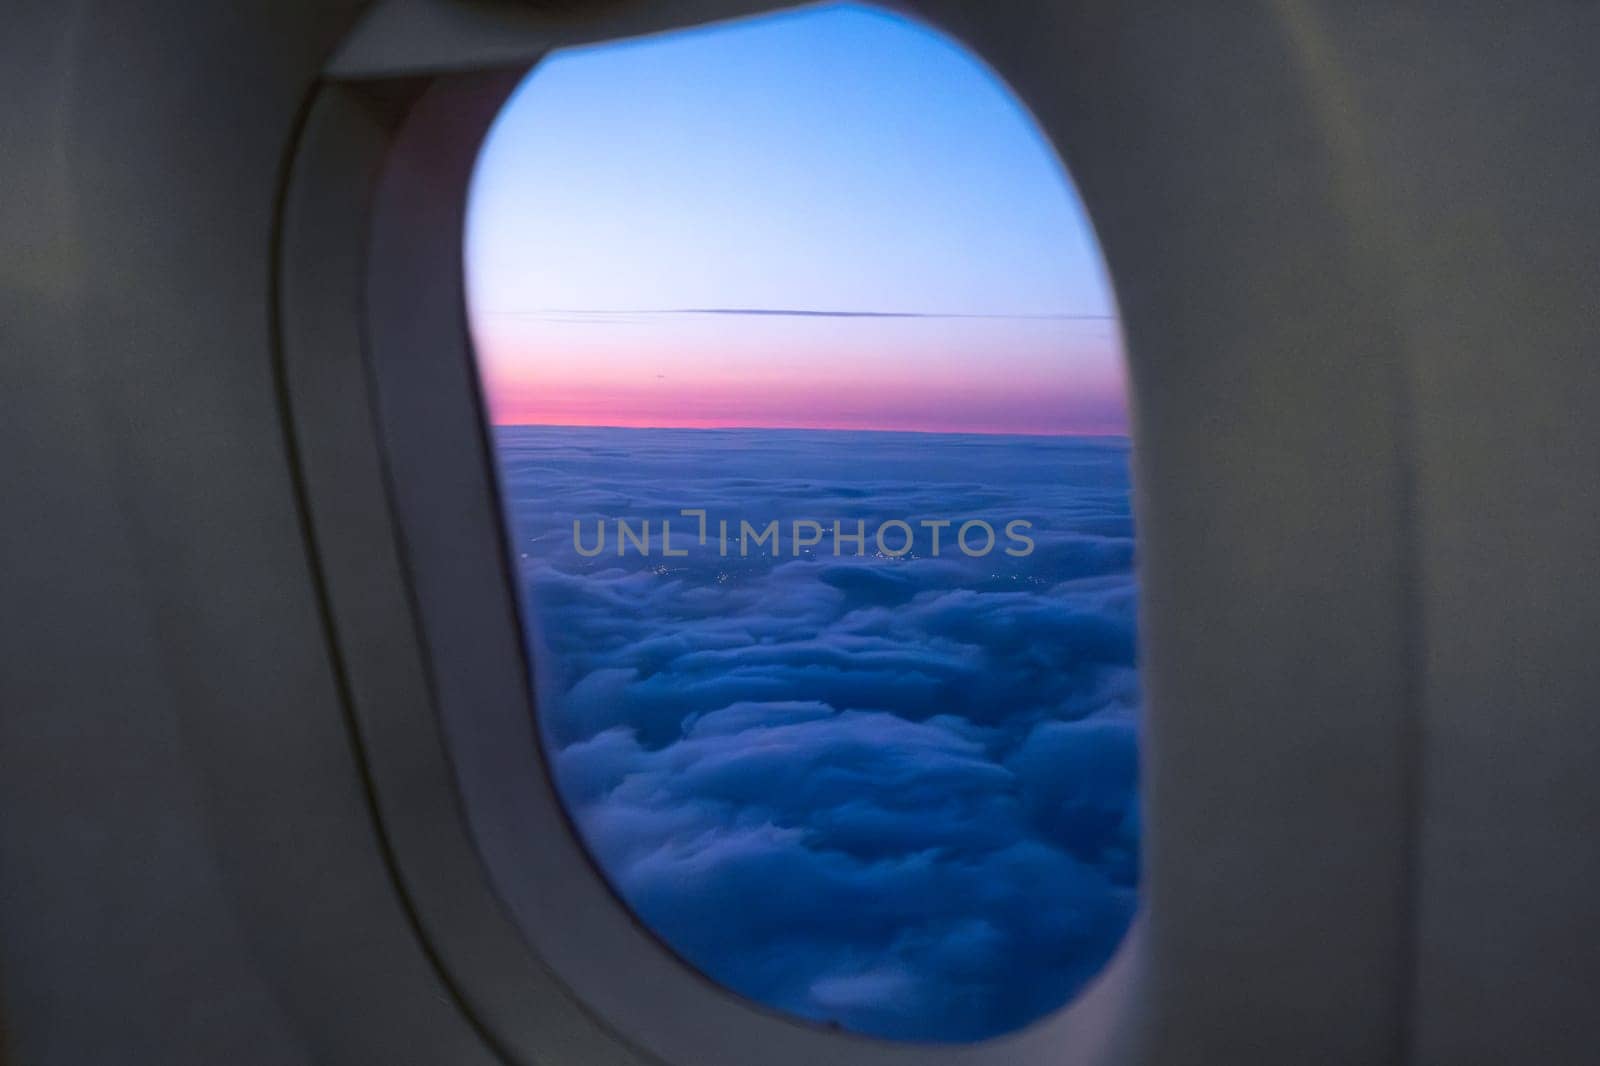 Amazing view of clouds and sunset in window on an airplane.